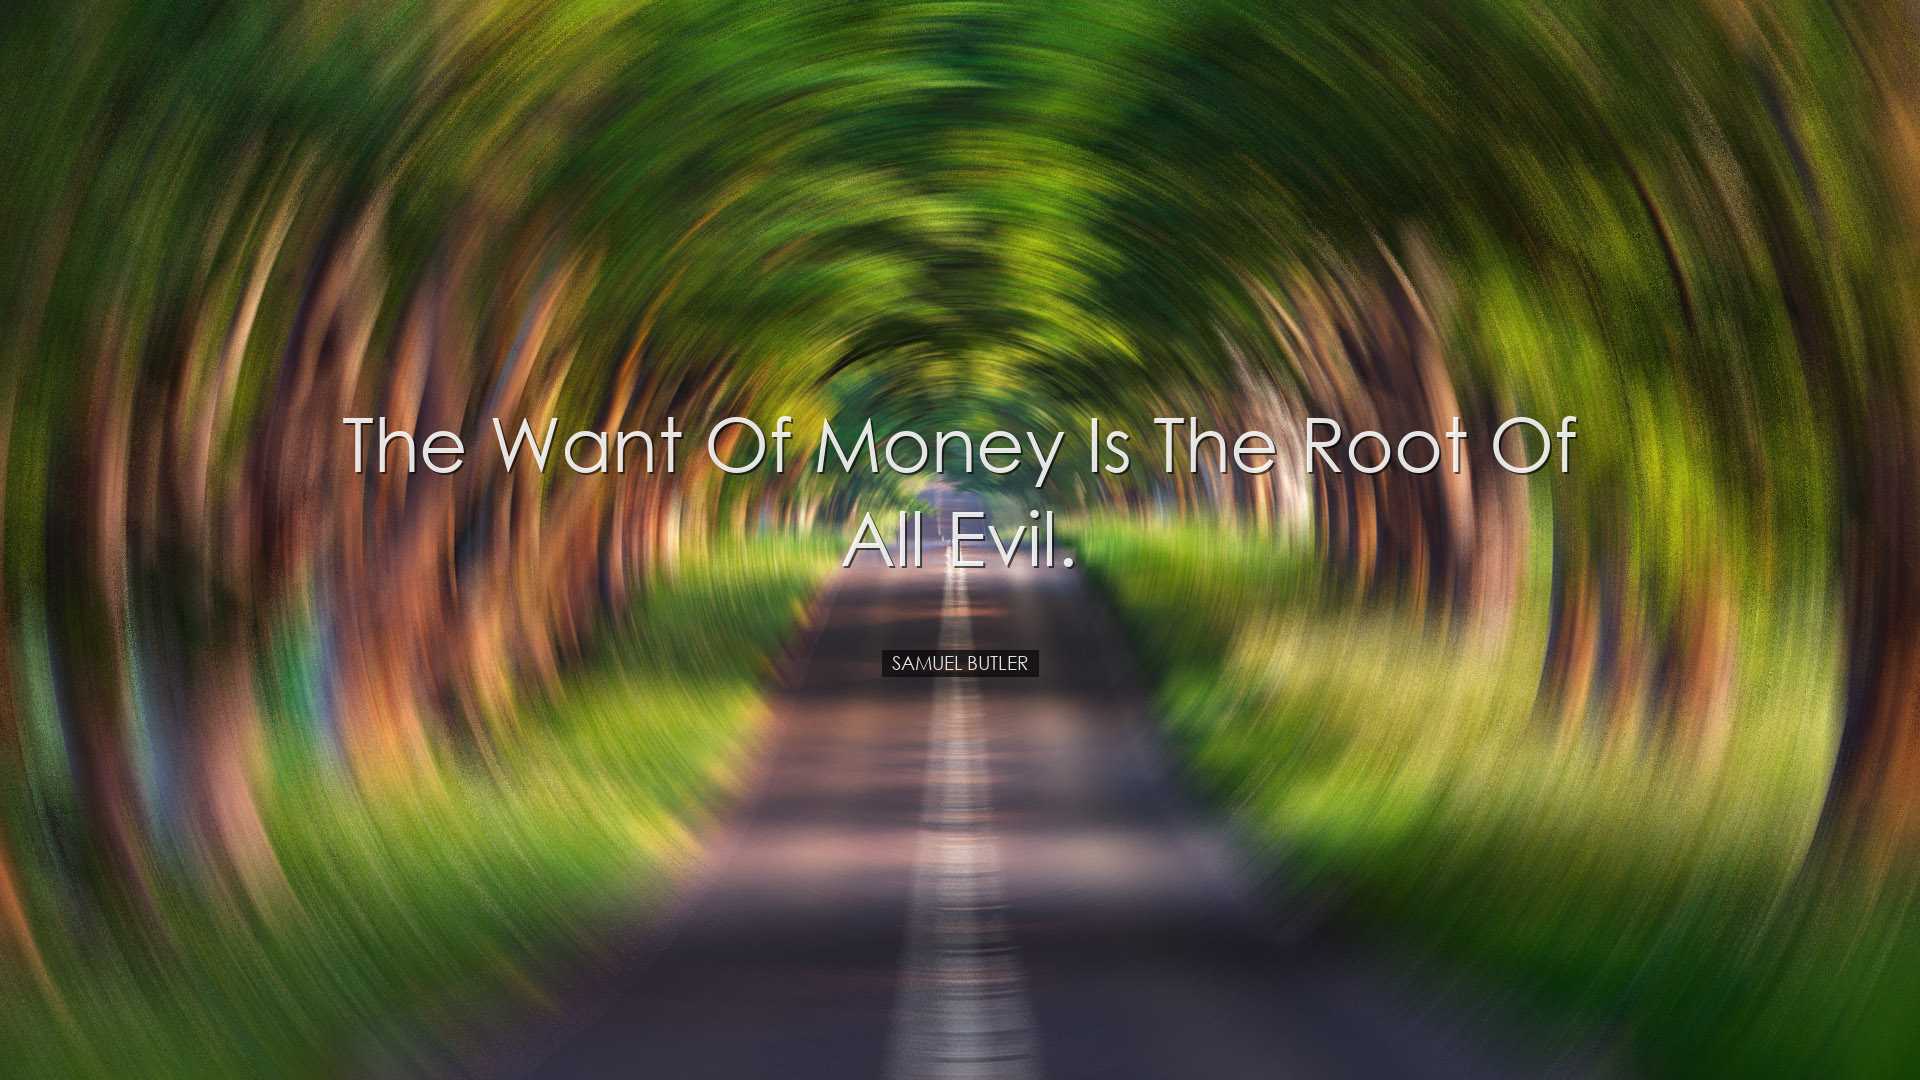 The want of money is the root of all evil. - Samuel Butler